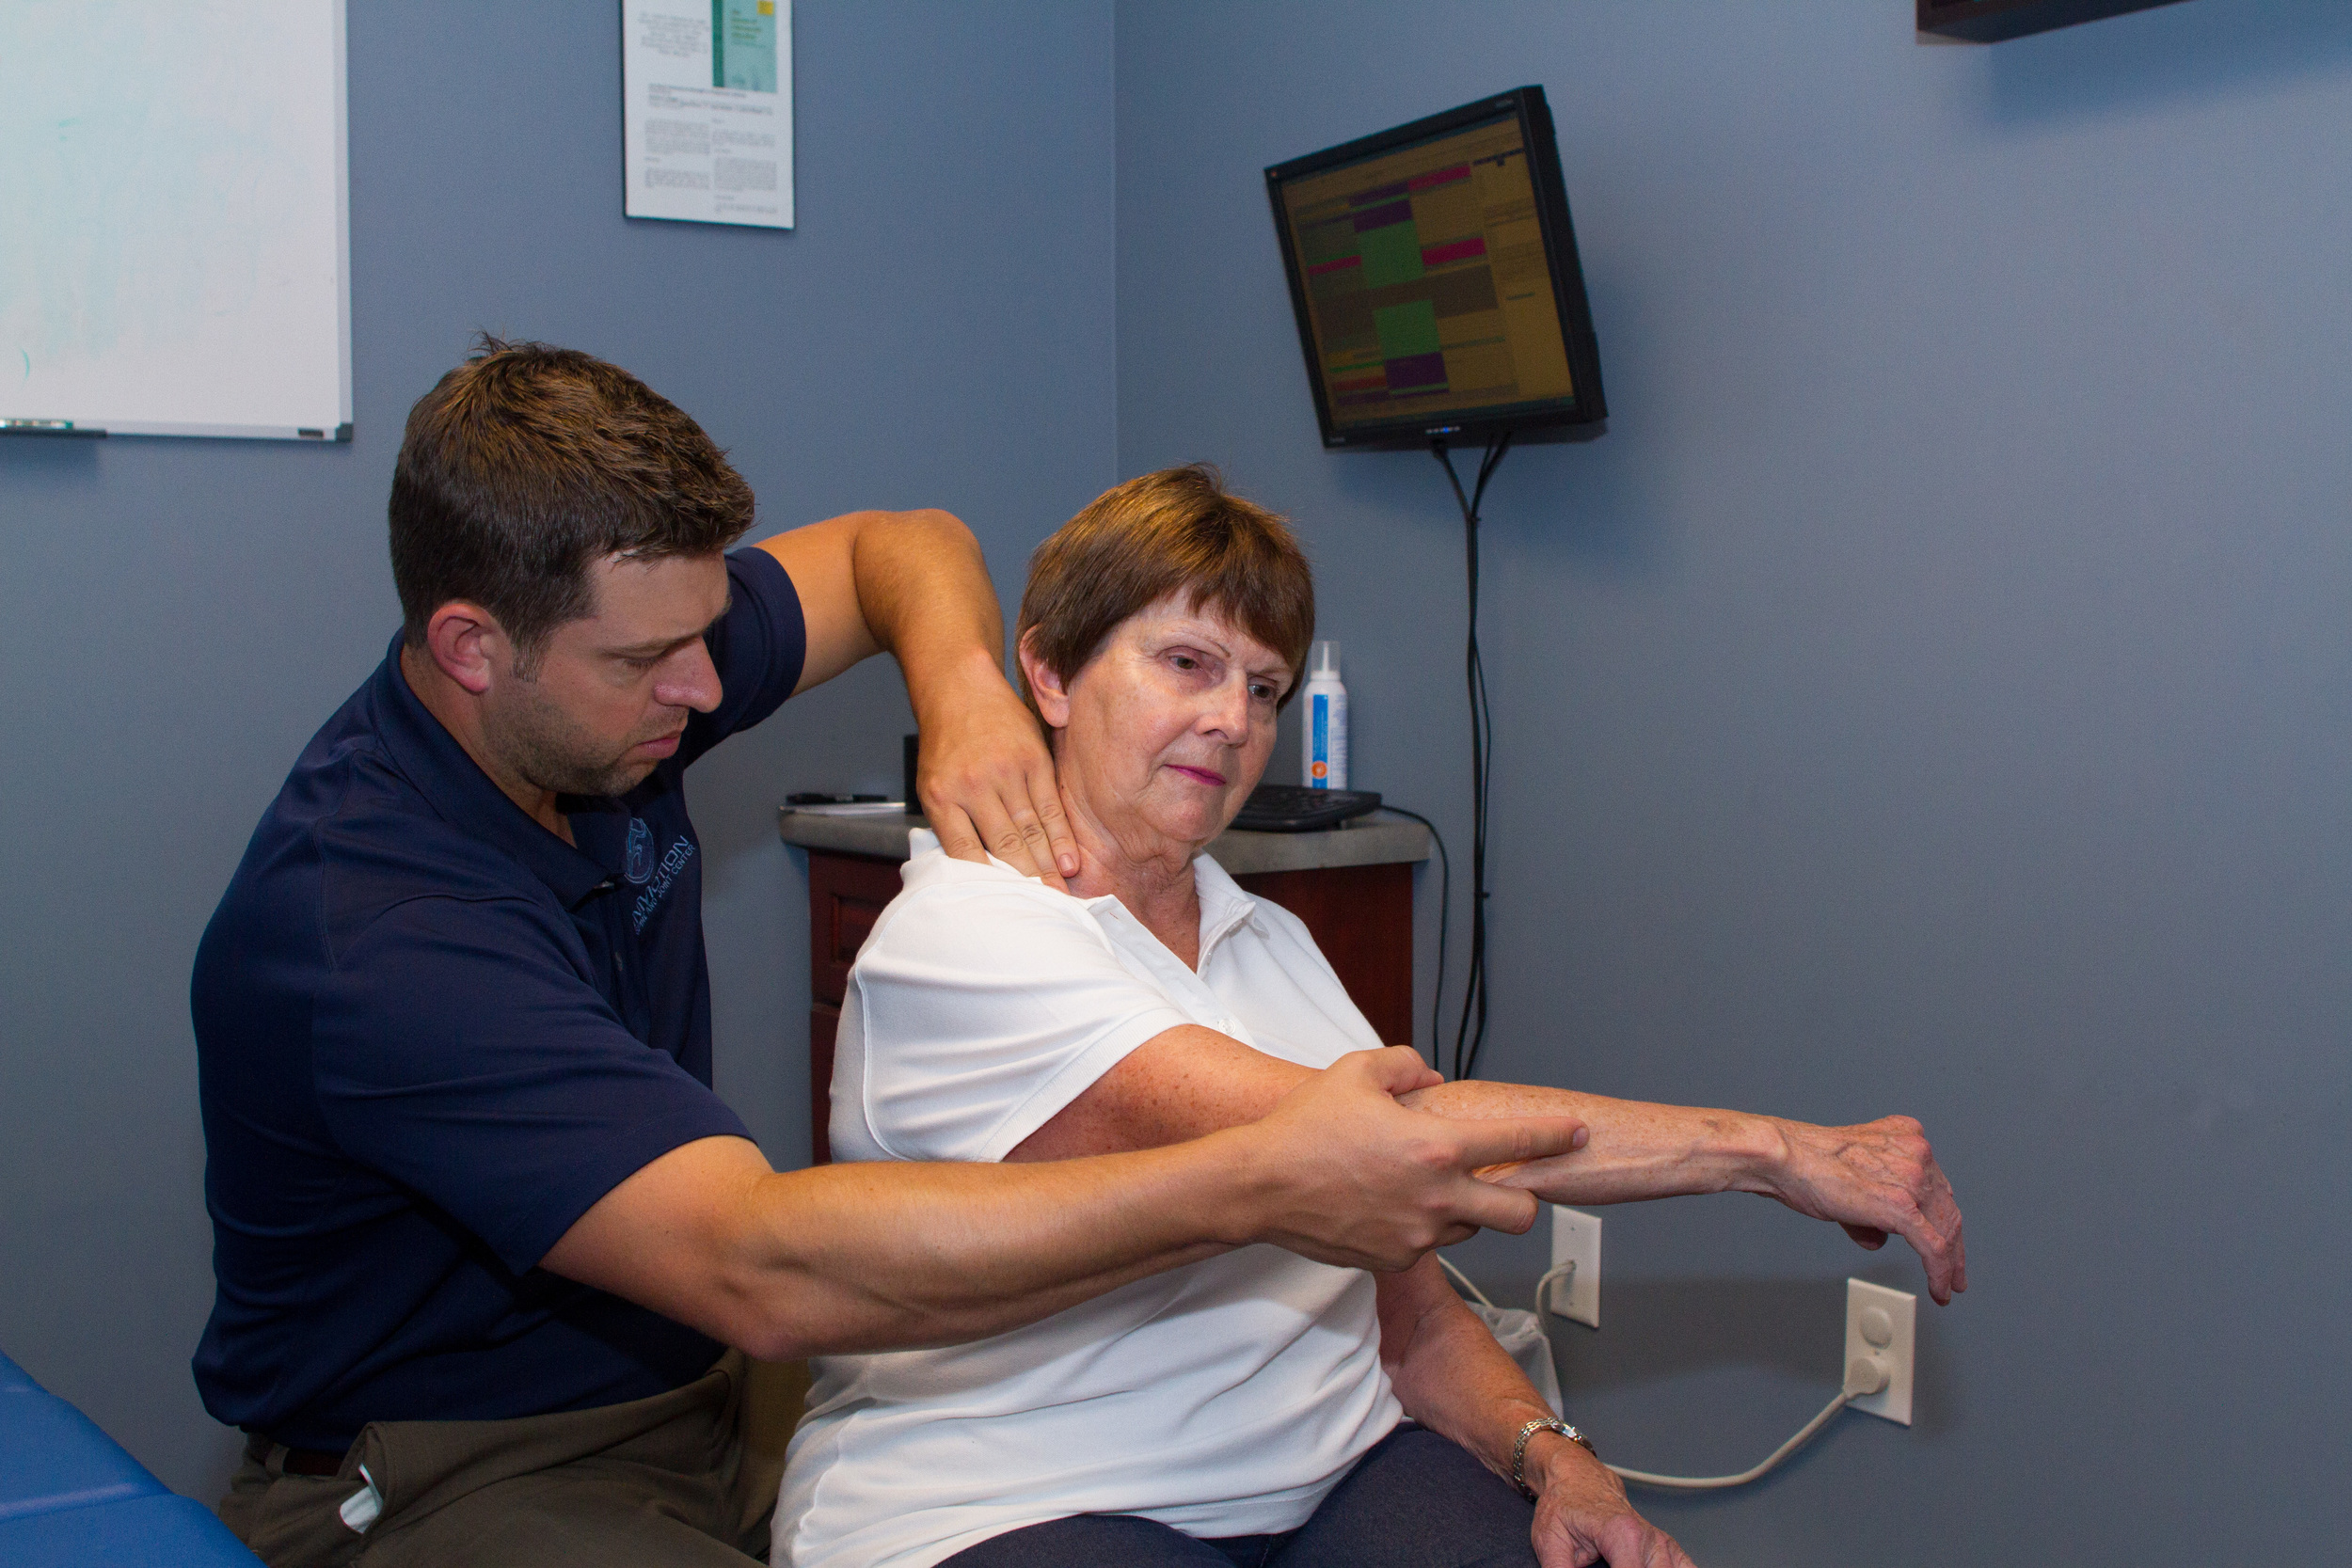  Manual Therapy with Active Patient Movement for shoulder pain 